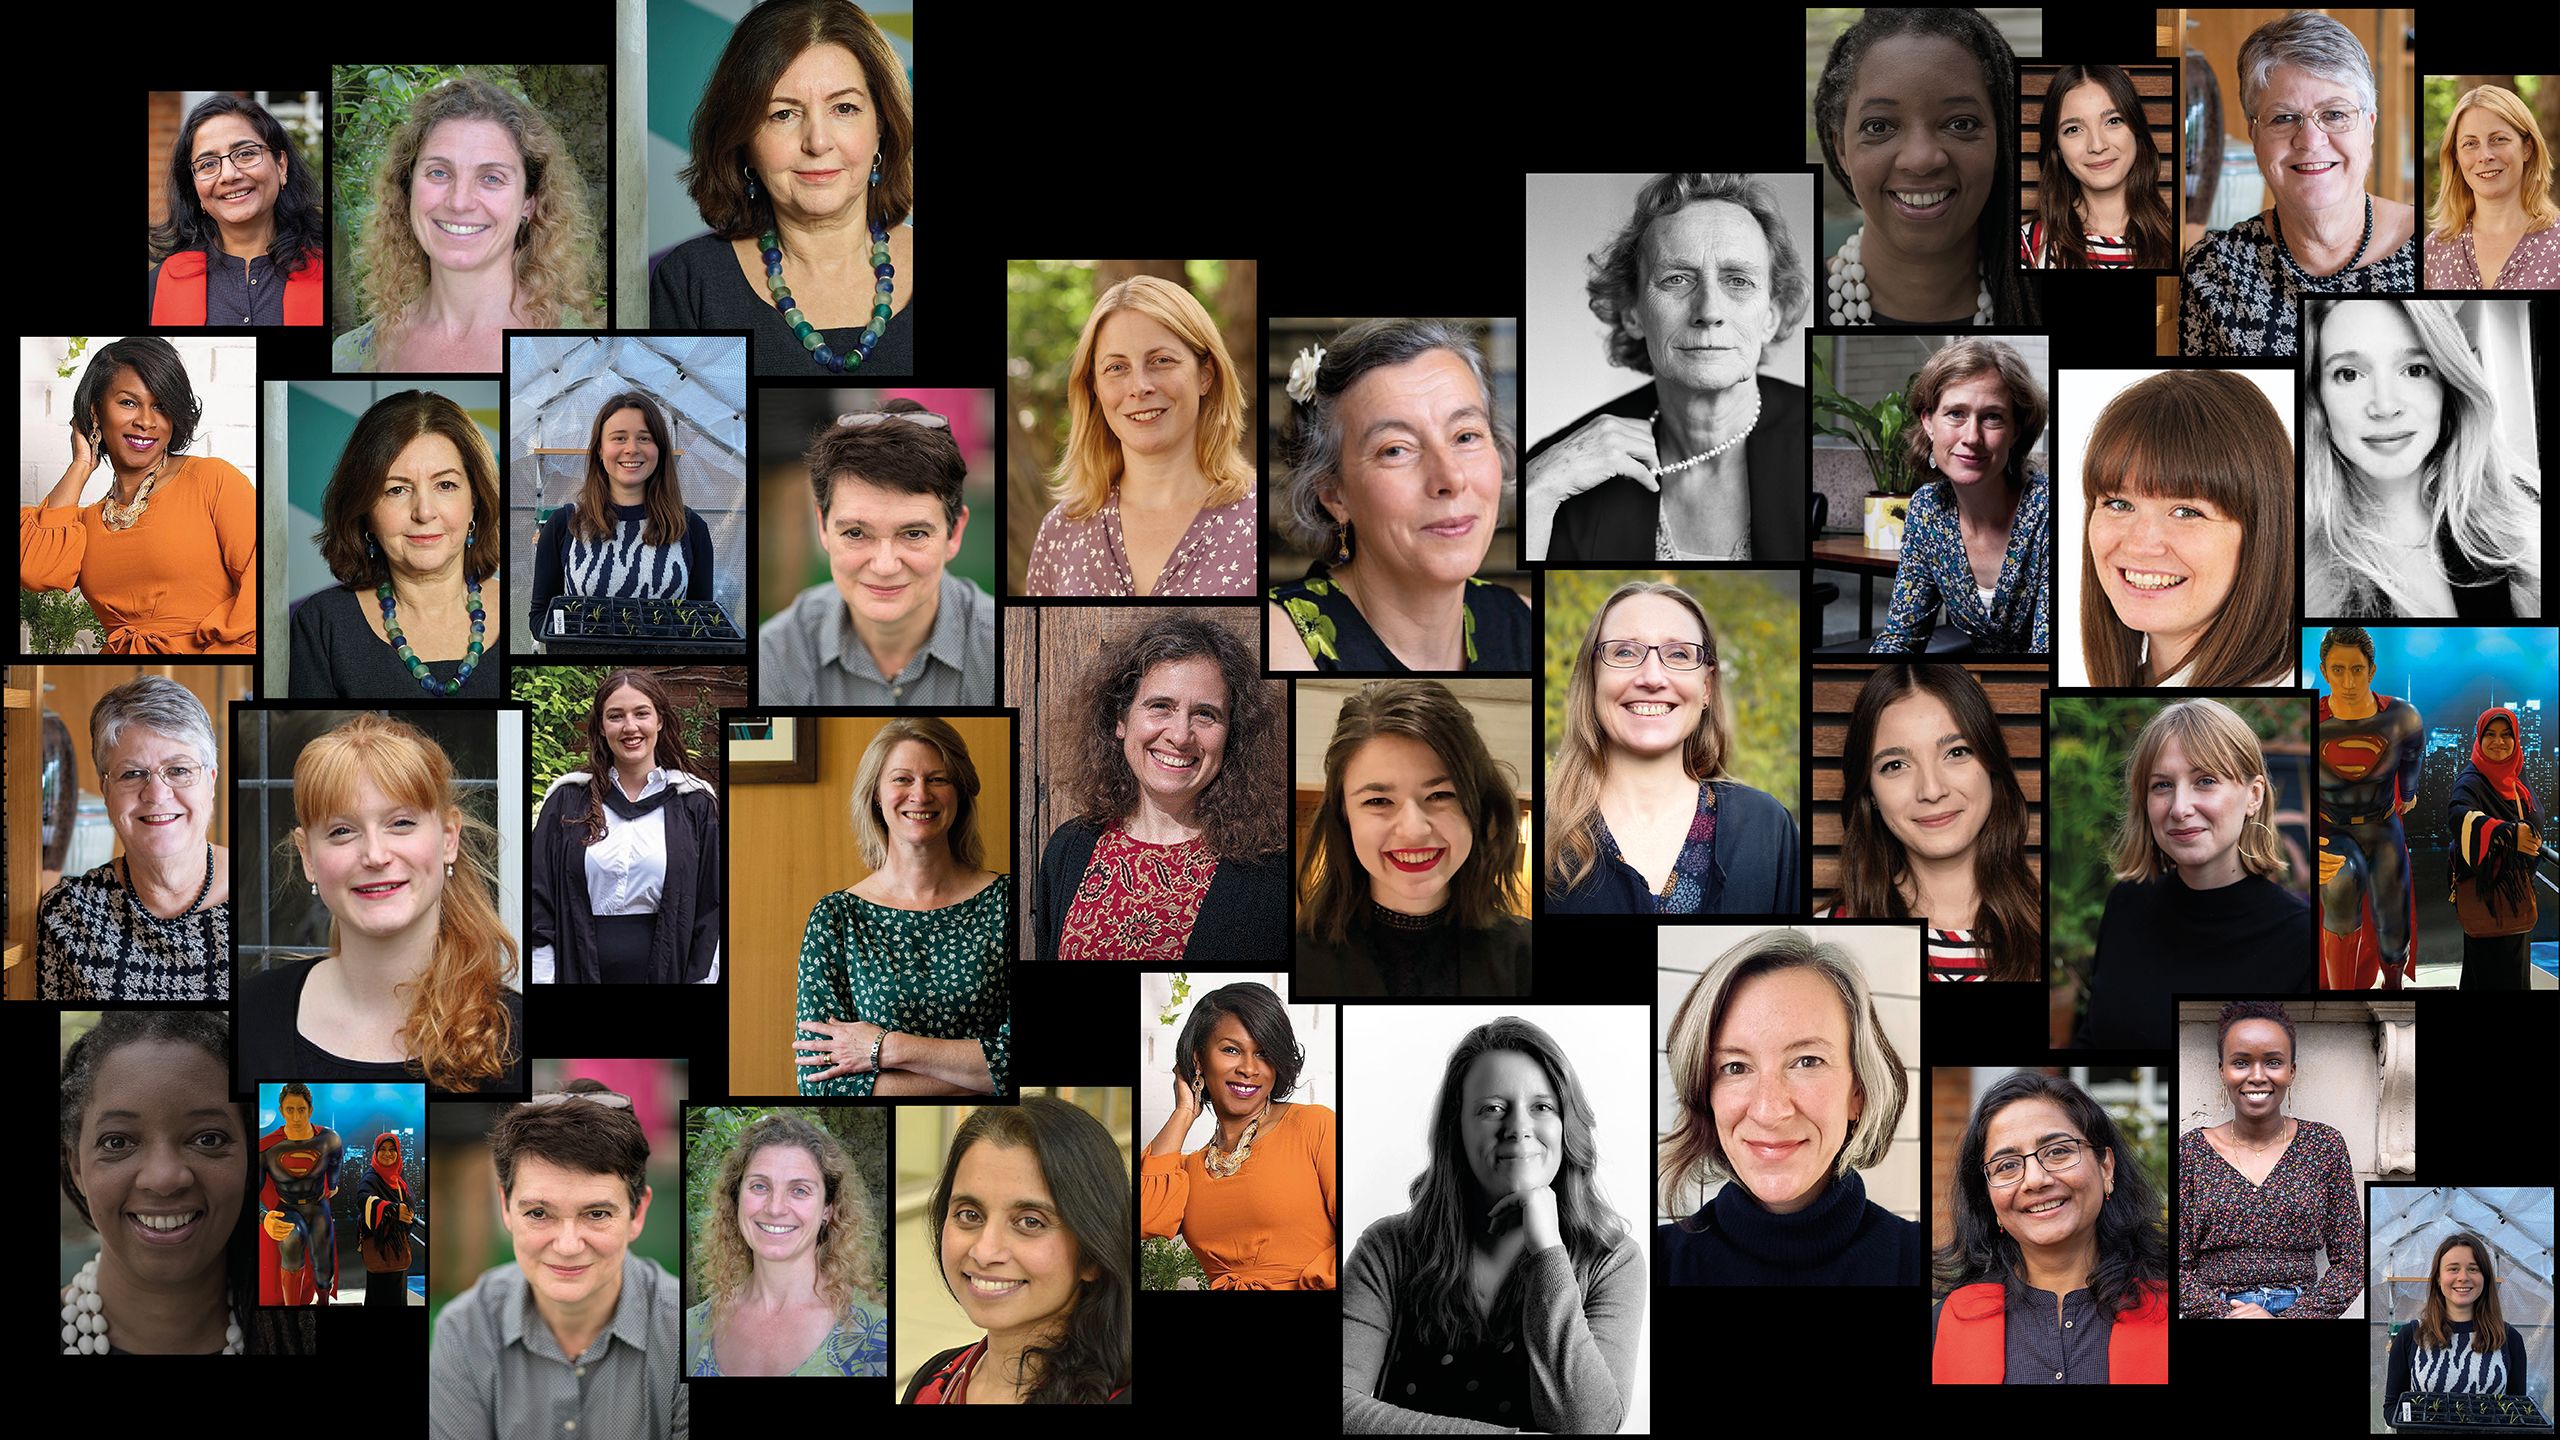 A collage of inspiring women from Cambridge University